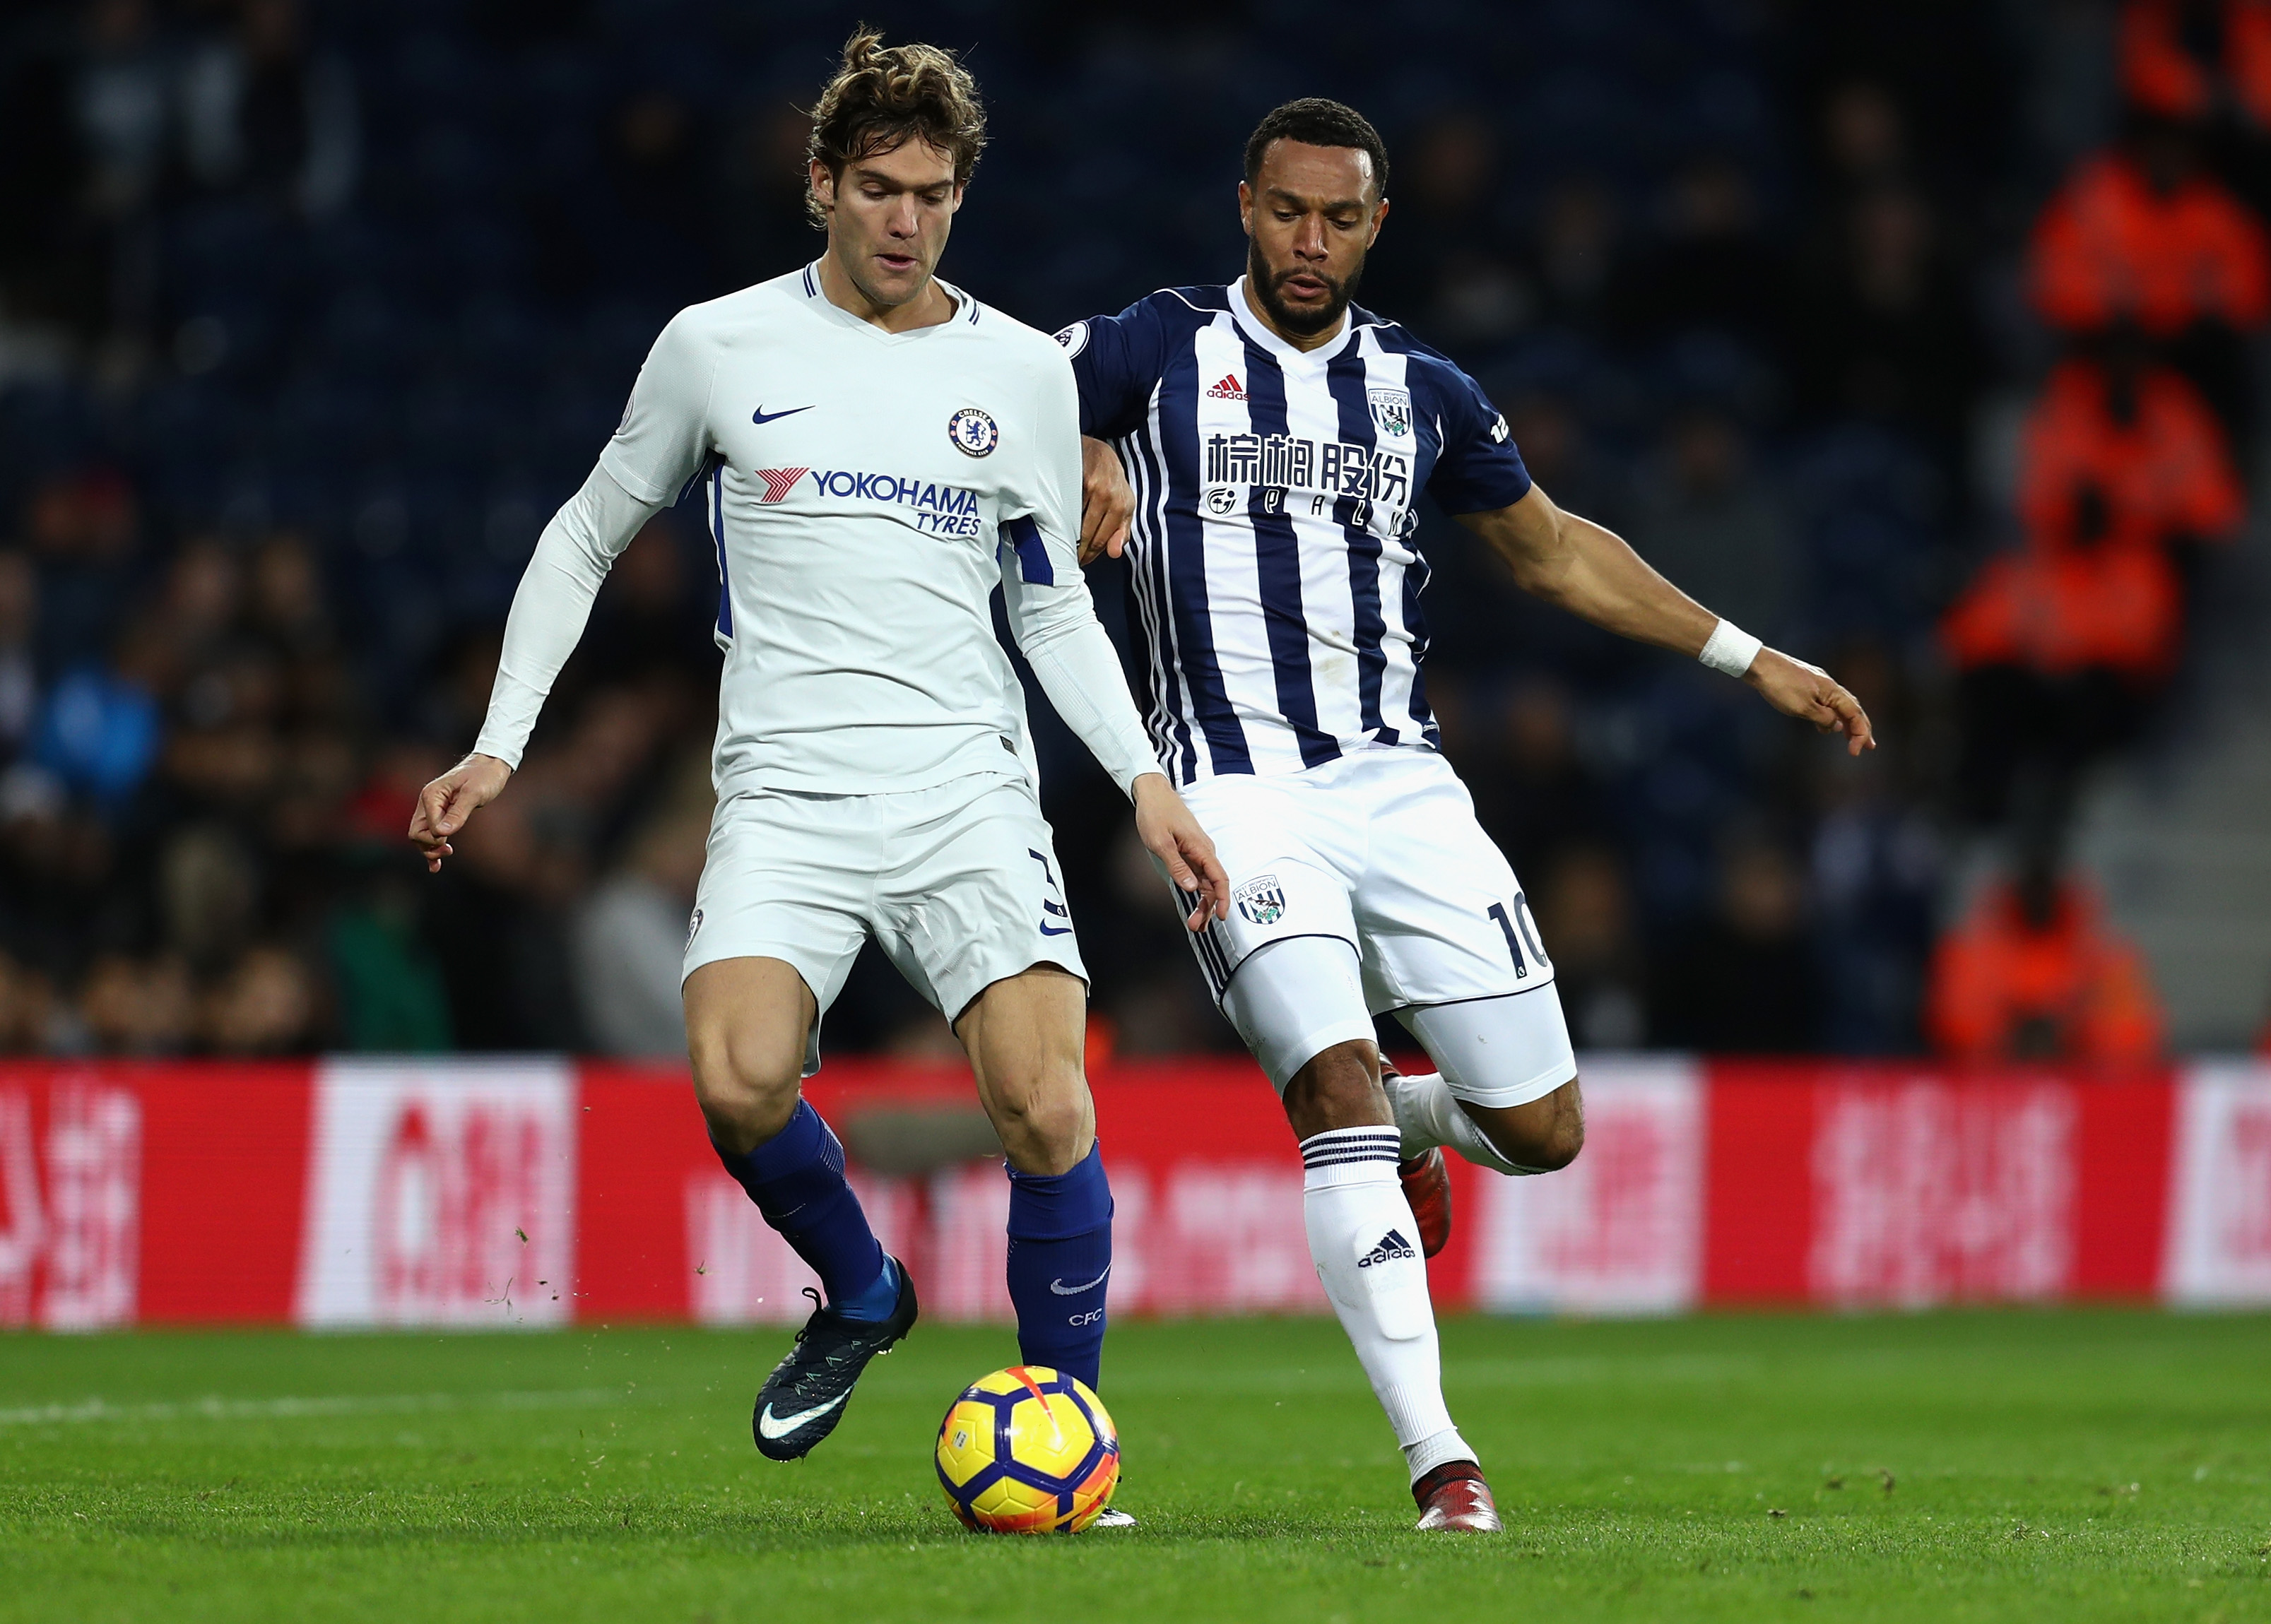 WEST BROMWICH, ENGLAND - NOVEMBER 18:  Marcos Alonso of Chelsea and Matt Phillips of West Bromwich Albion compete for the ball during the Premier League match between West Bromwich Albion and Chelsea at The Hawthorns on November 18, 2017 in West Bromwich, England.  (Photo by Catherine Ivill/Getty Images)